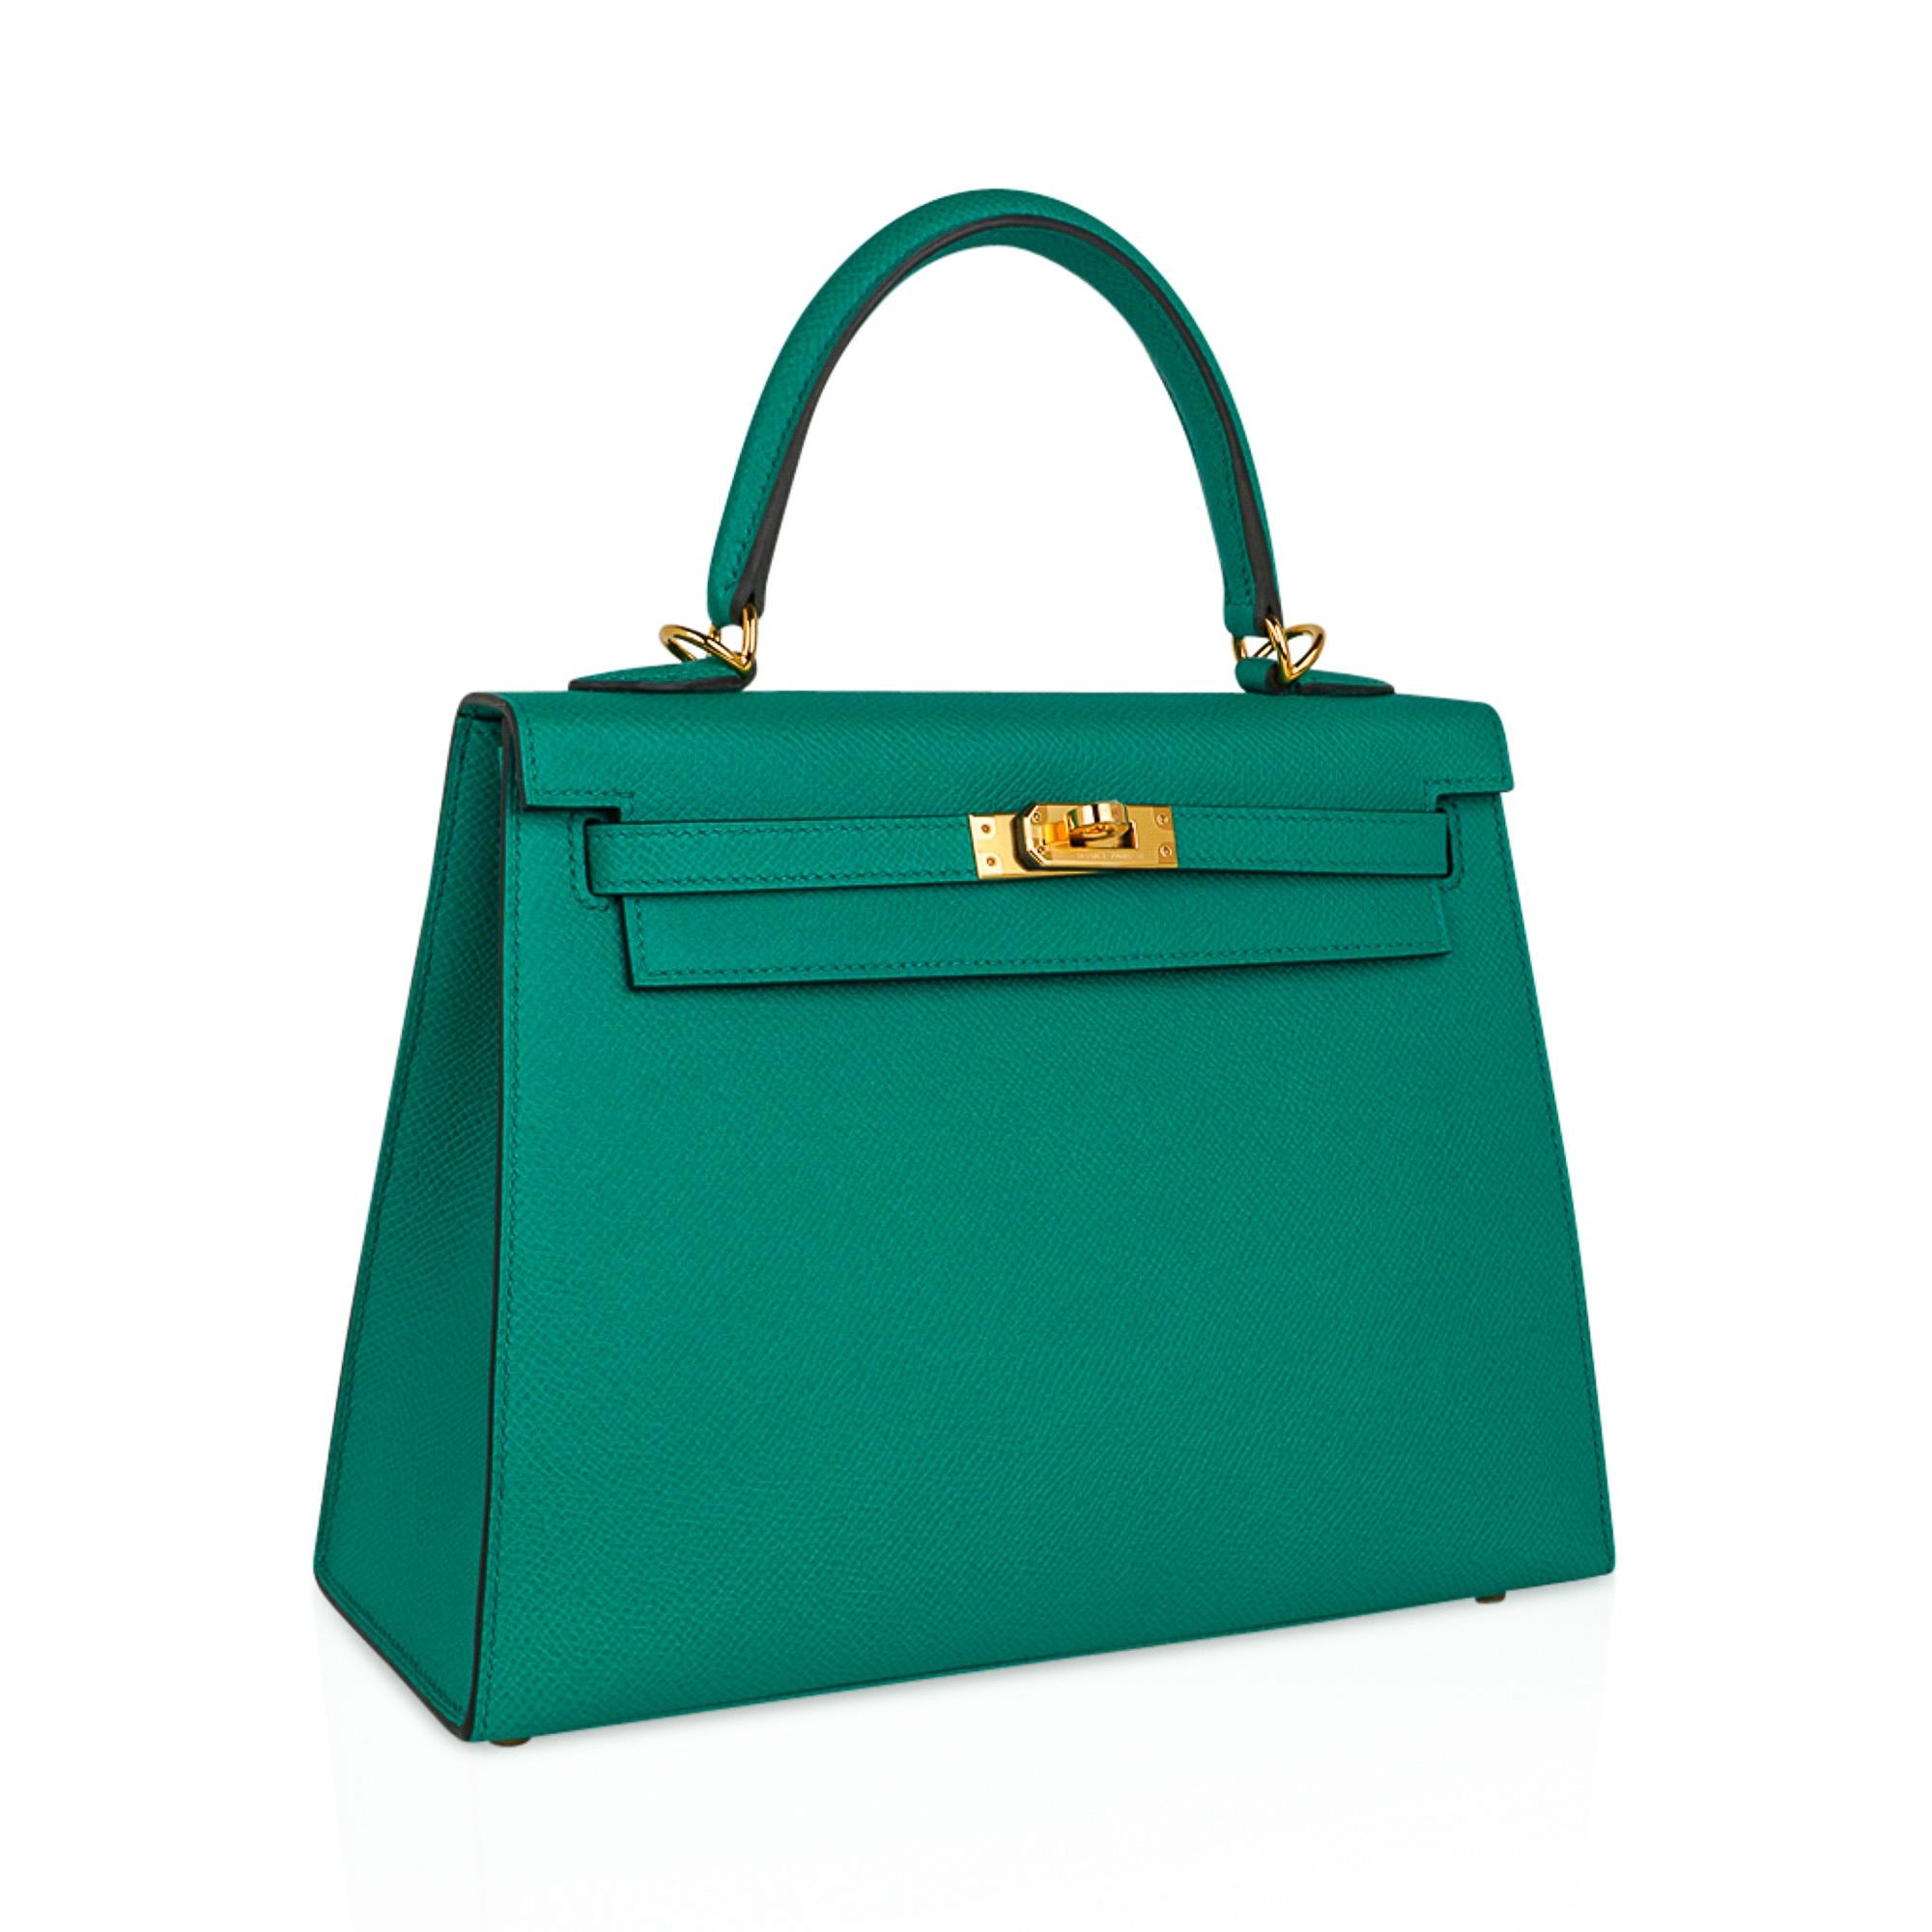 Mightychic offers an Hermes Kelly 25 bag Sellier featured in spectacular Jade.
This  beautiful Hermes green is fast becoming a collectors treasure.
Exquisite with gold hardware and epsom leather.
Epsom leather is known for to show rich saturated